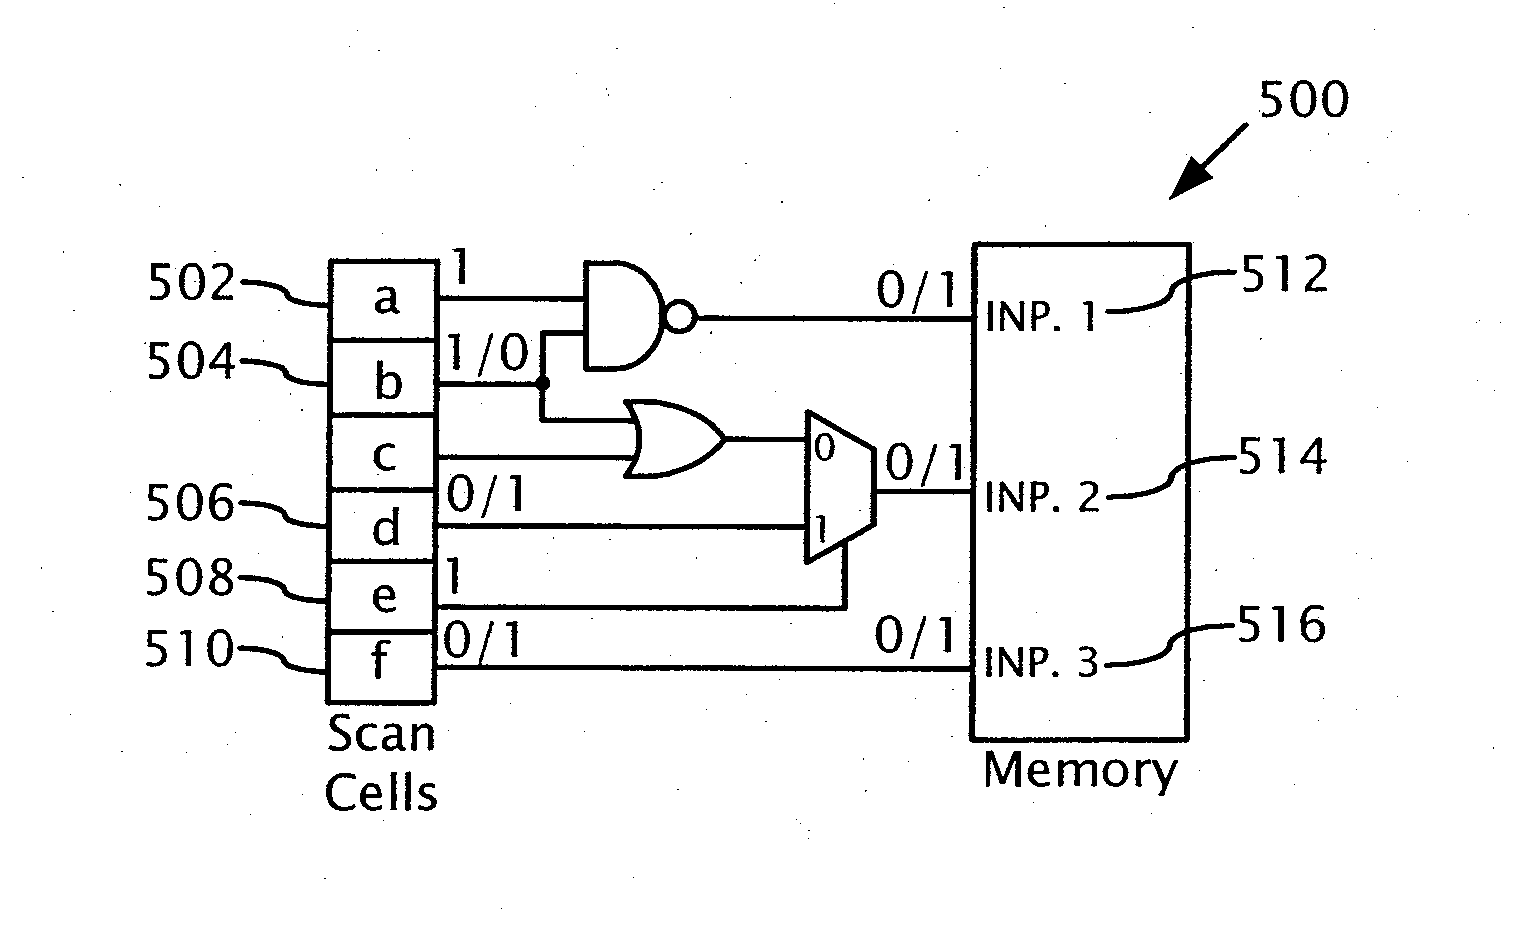 Testing embedded memories in an integrated circuit